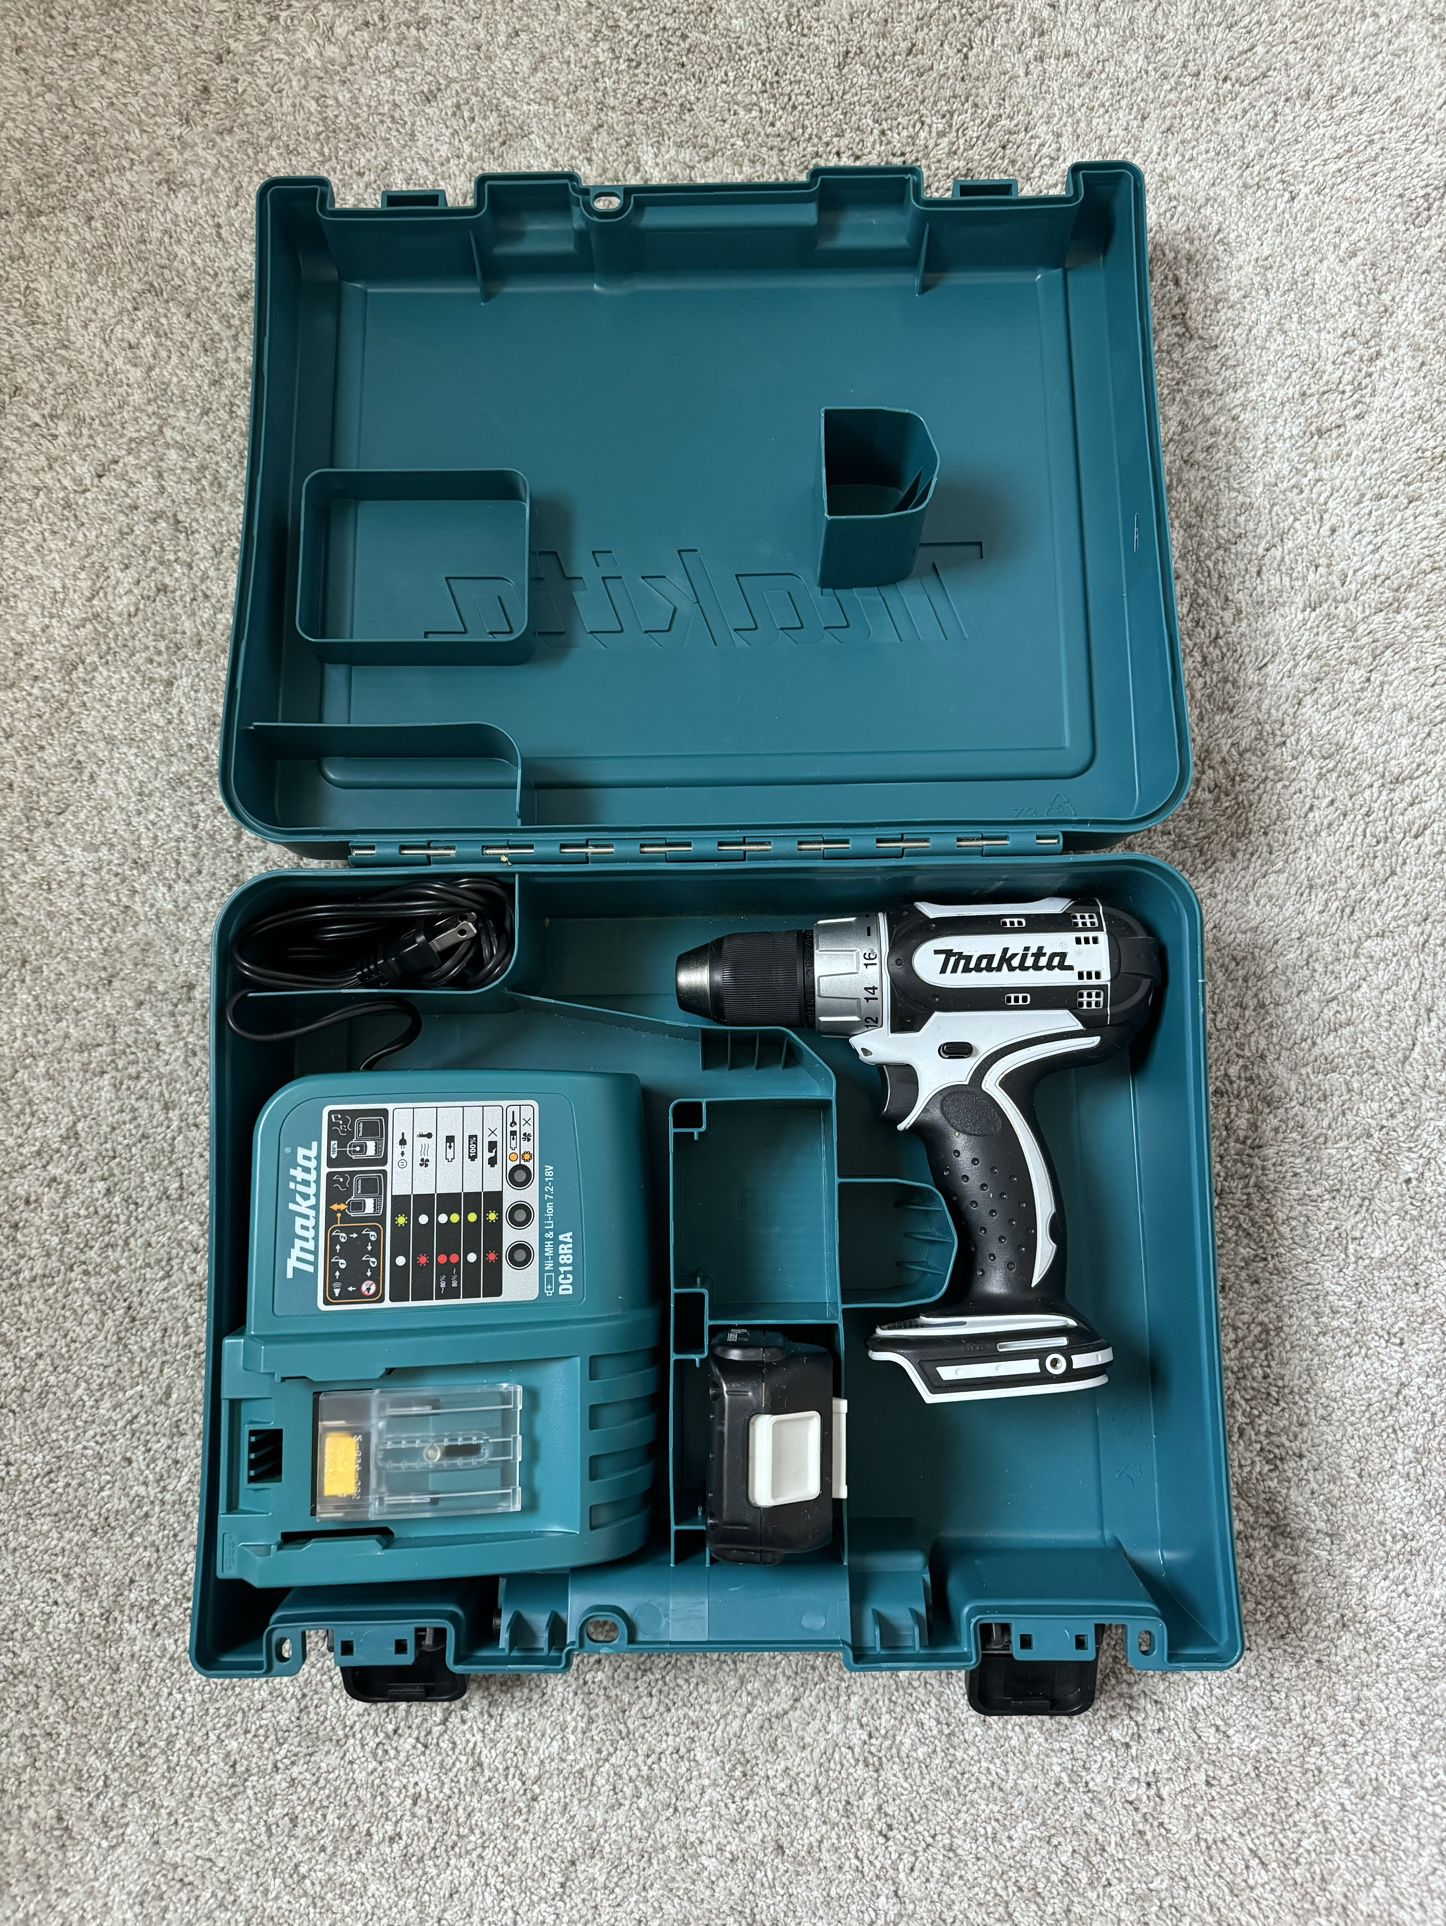 Makita 18v Drill With 2 Batteries, Charger, And Case